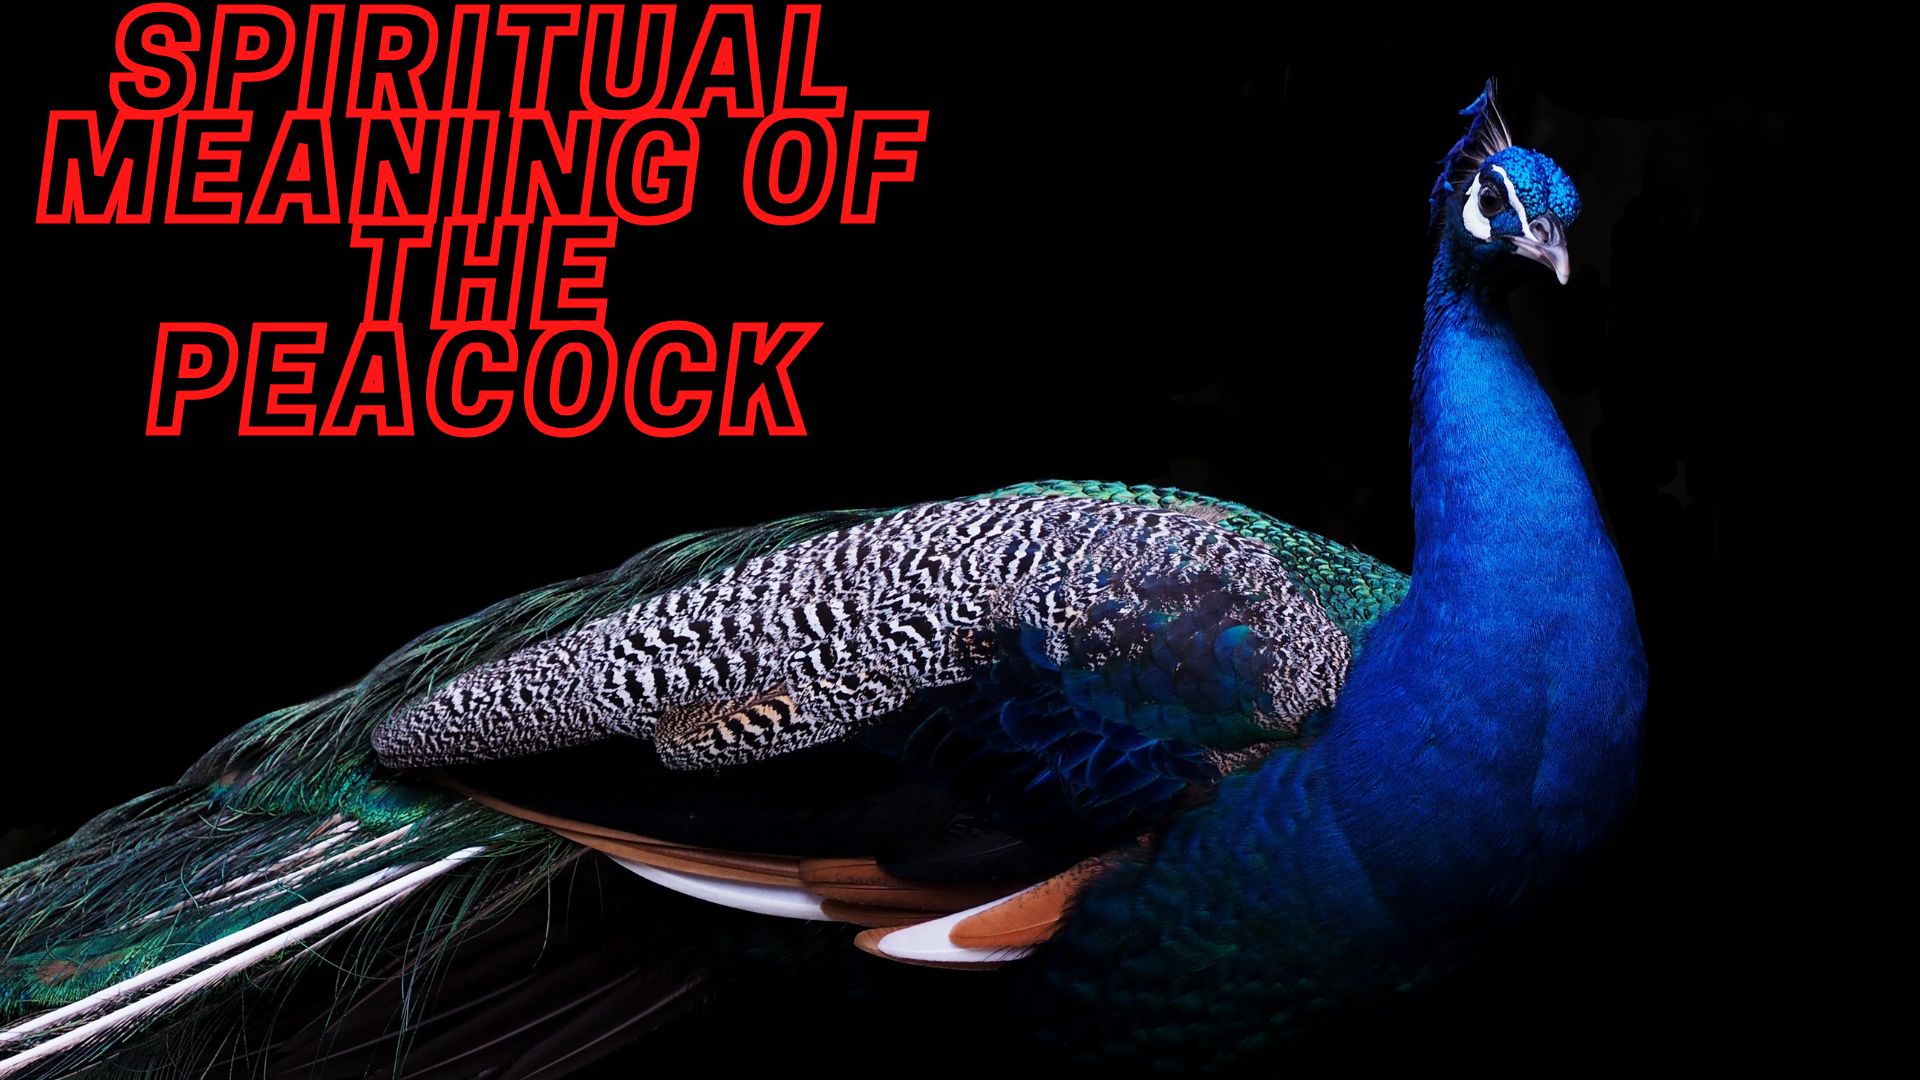 Spiritual Meaning Of The Peacock - Symbol For Power, Strength, Confidence, And Even Divinity